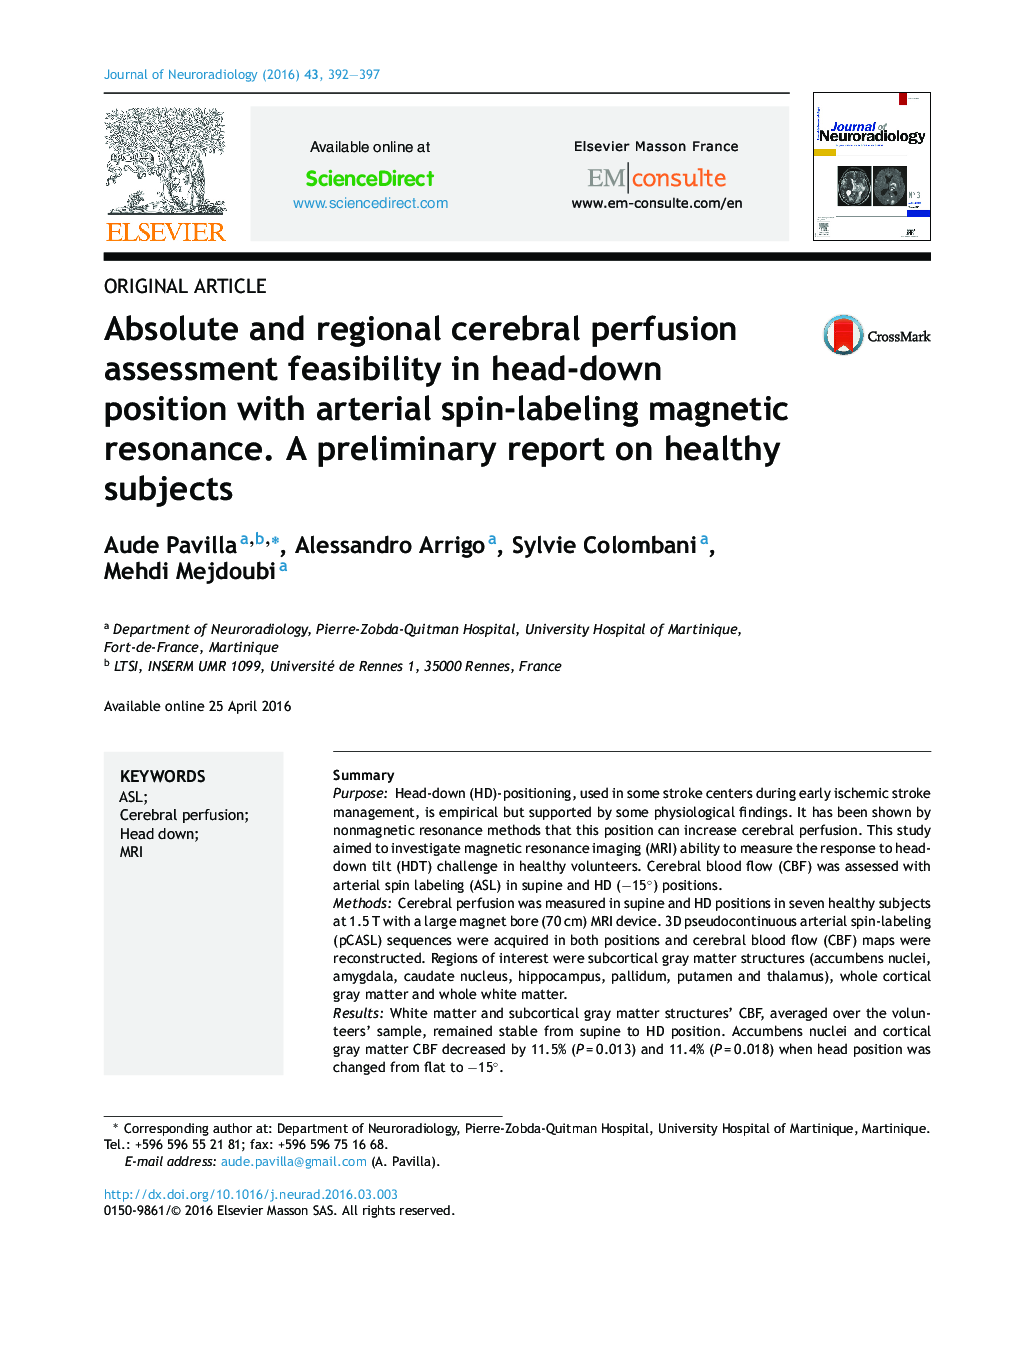 Original articleAbsolute and regional cerebral perfusion assessment feasibility in head-down position with arterial spin-labeling magnetic resonance. A preliminary report on healthy subjects